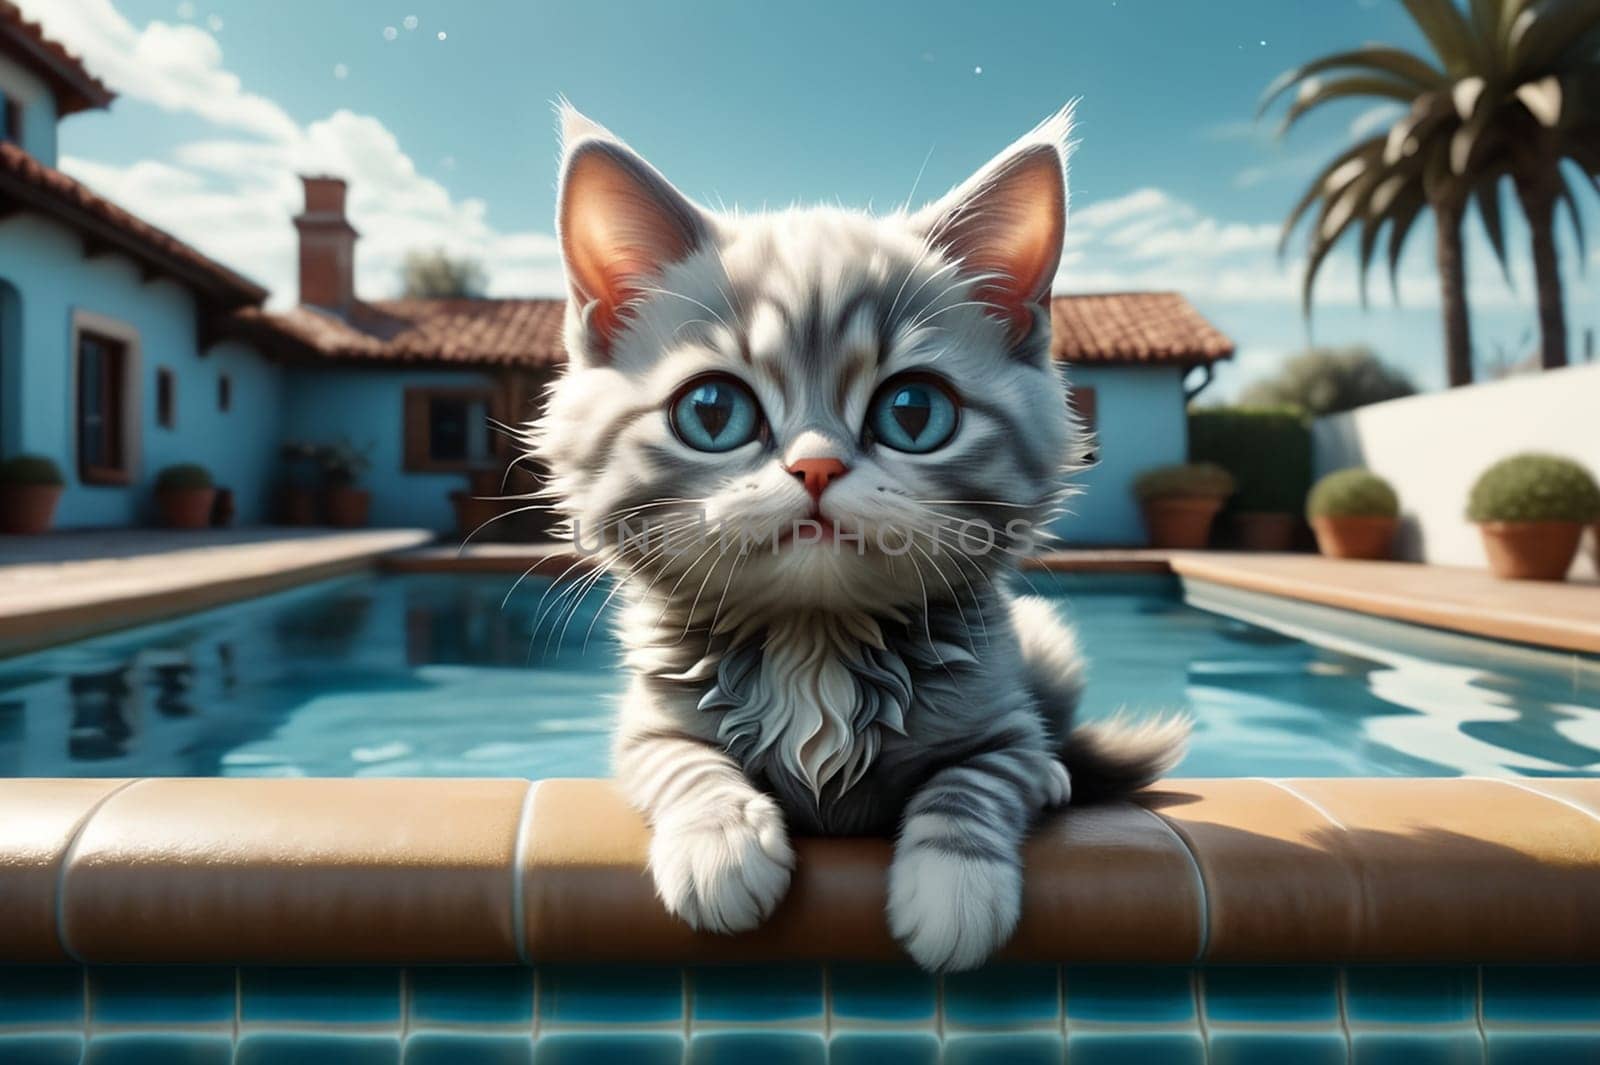 Happy cat swims in the pool near the house. by Rawlik